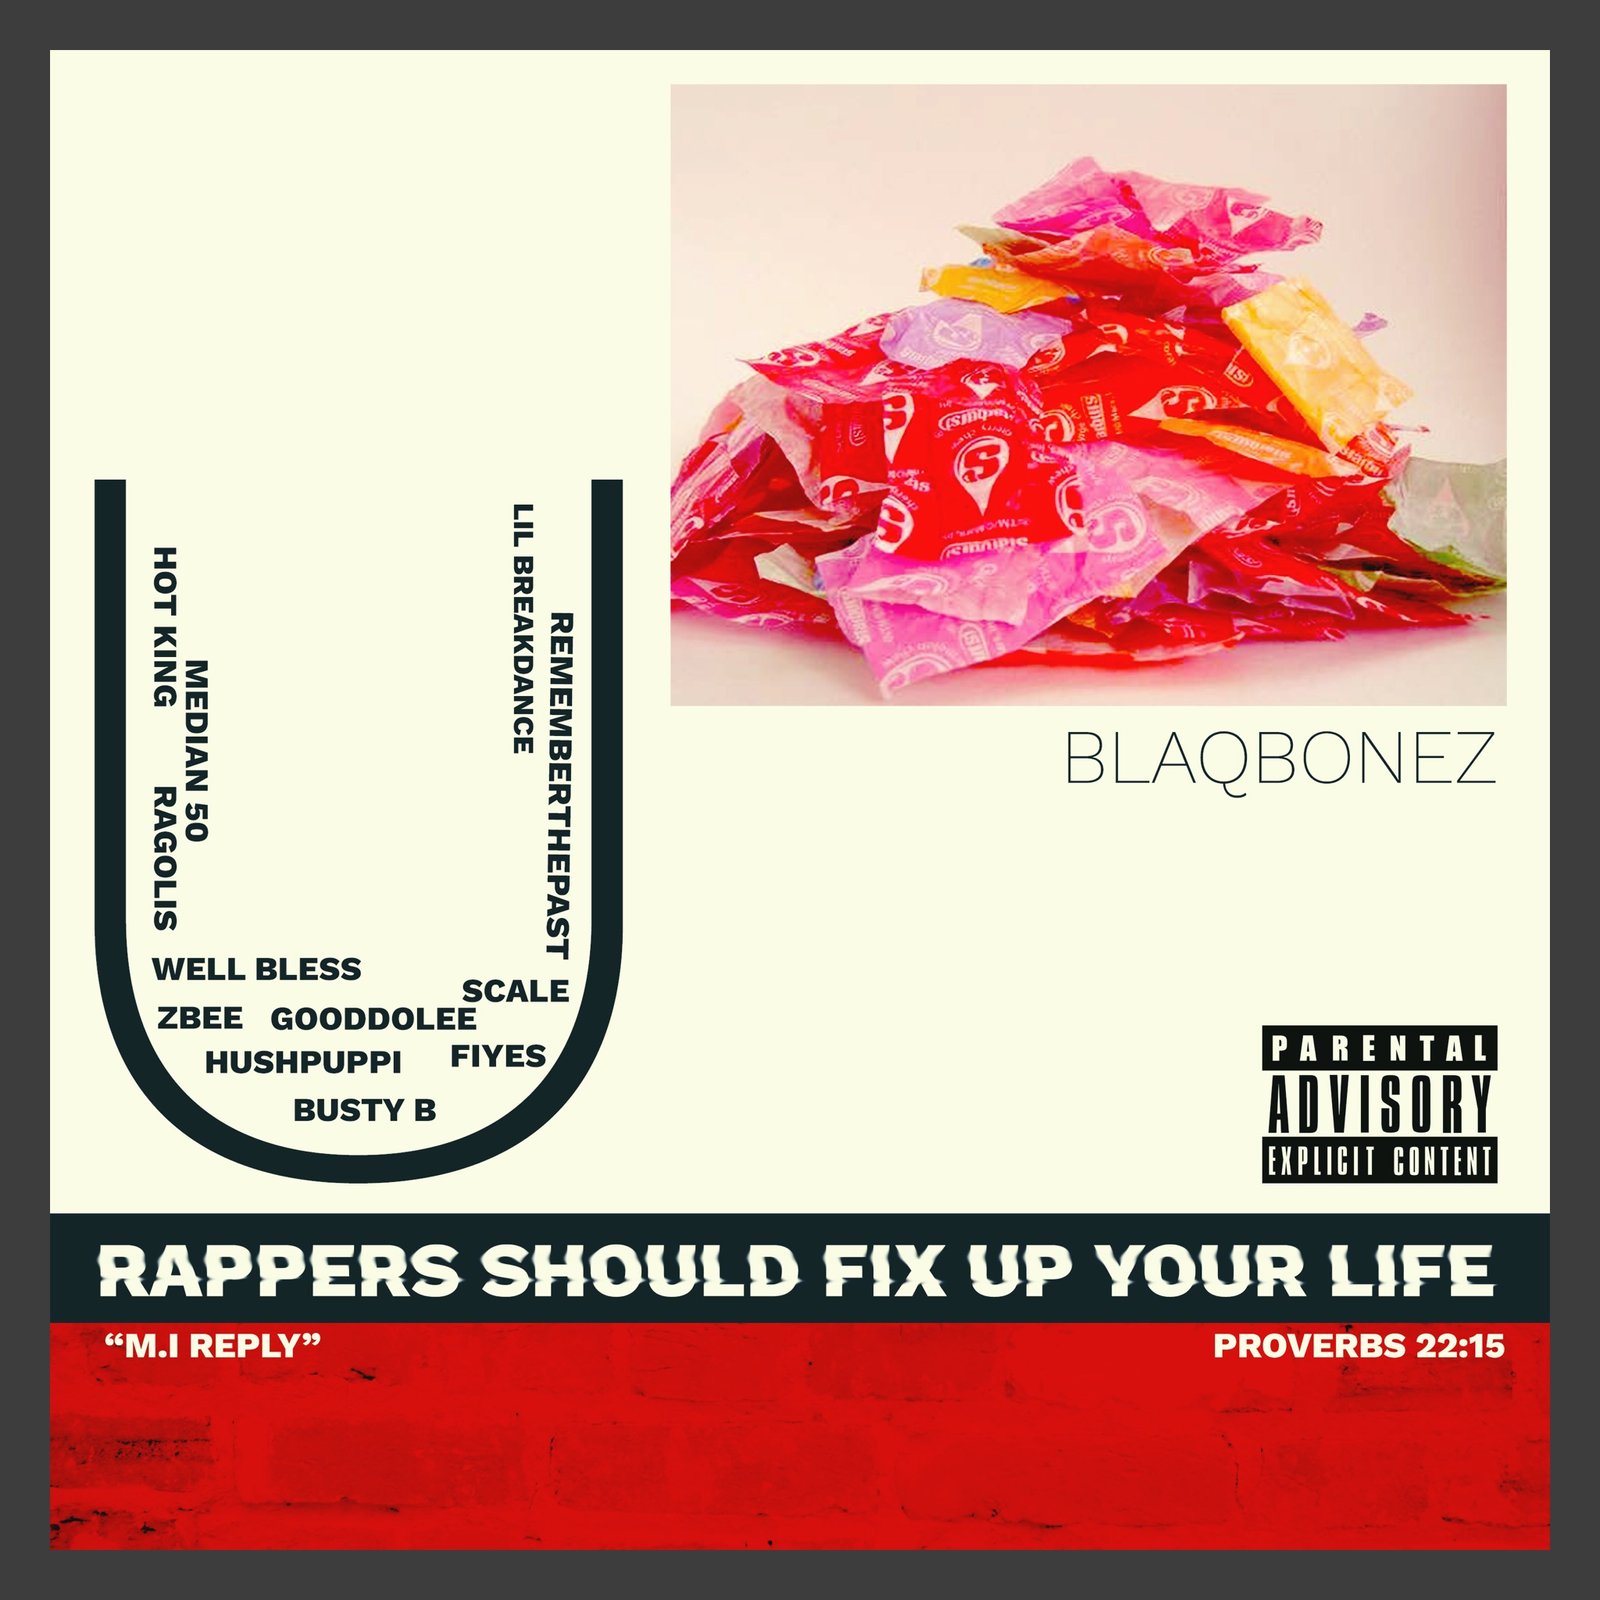 www southjamz com BlaqBones You Rappers Should Fix Up Your Life MI Abaga Reply mp3 image